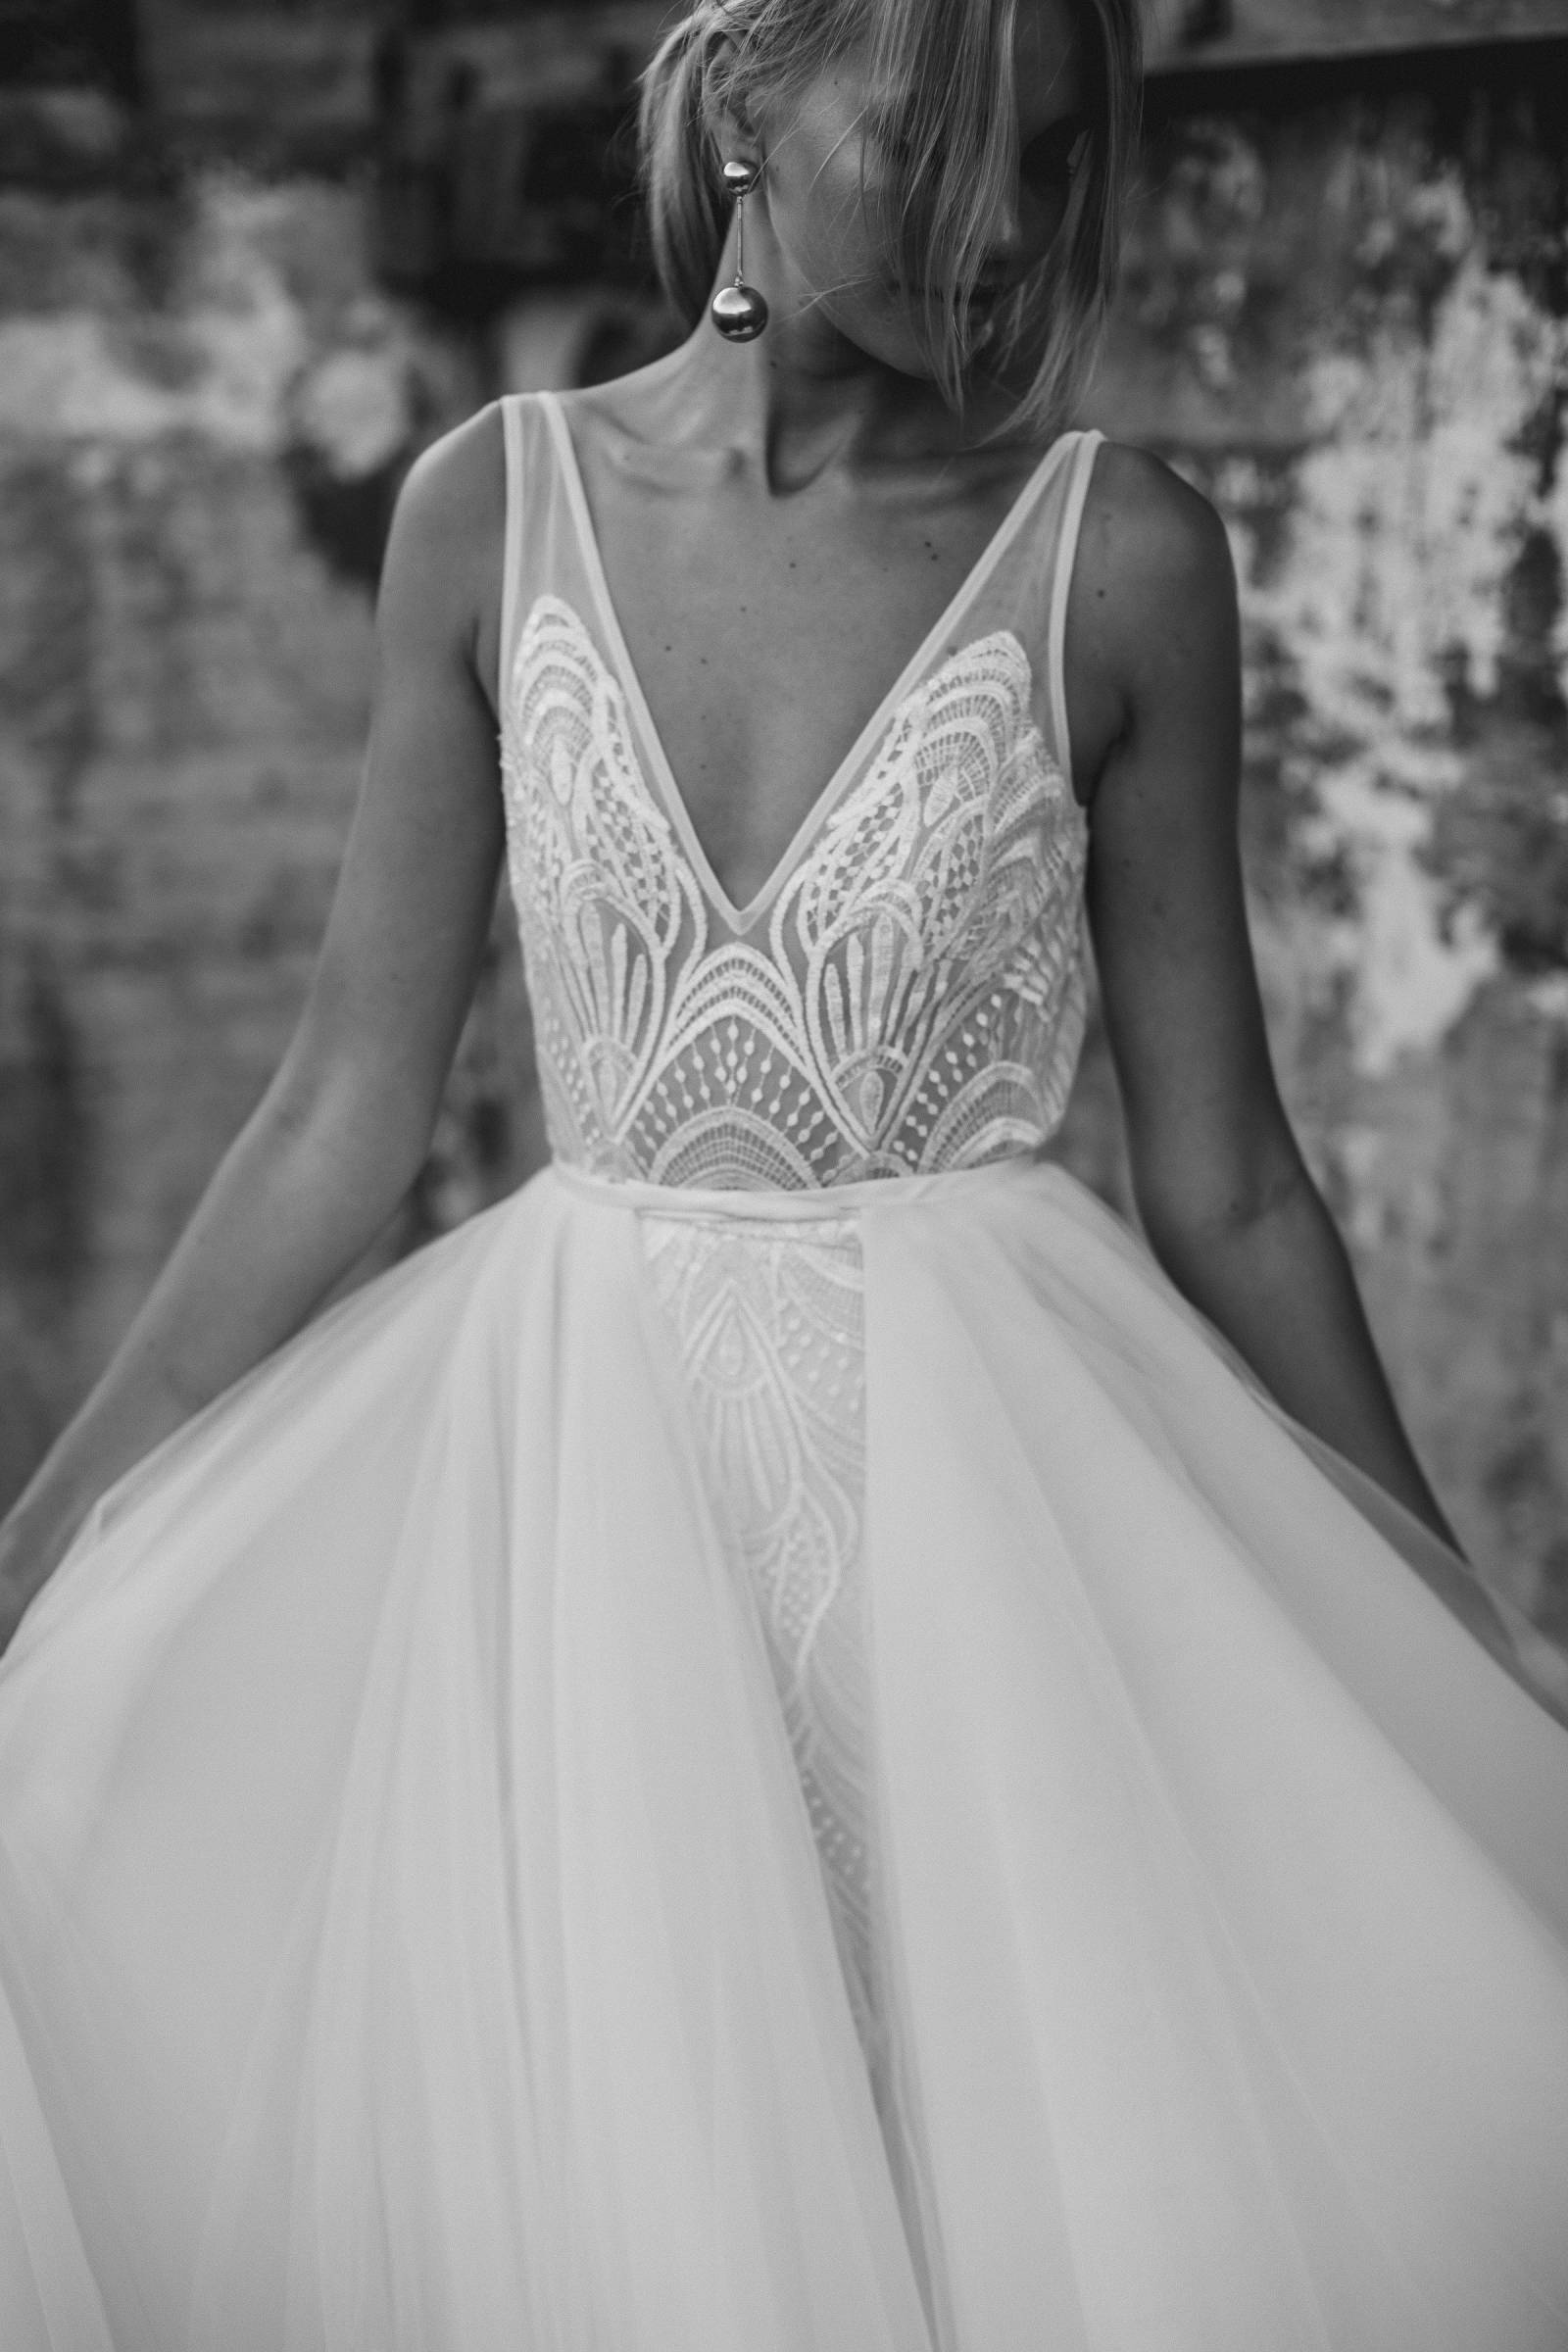 Modern and elegant wedding gowns from Made with Love Bridal | Bridal ...